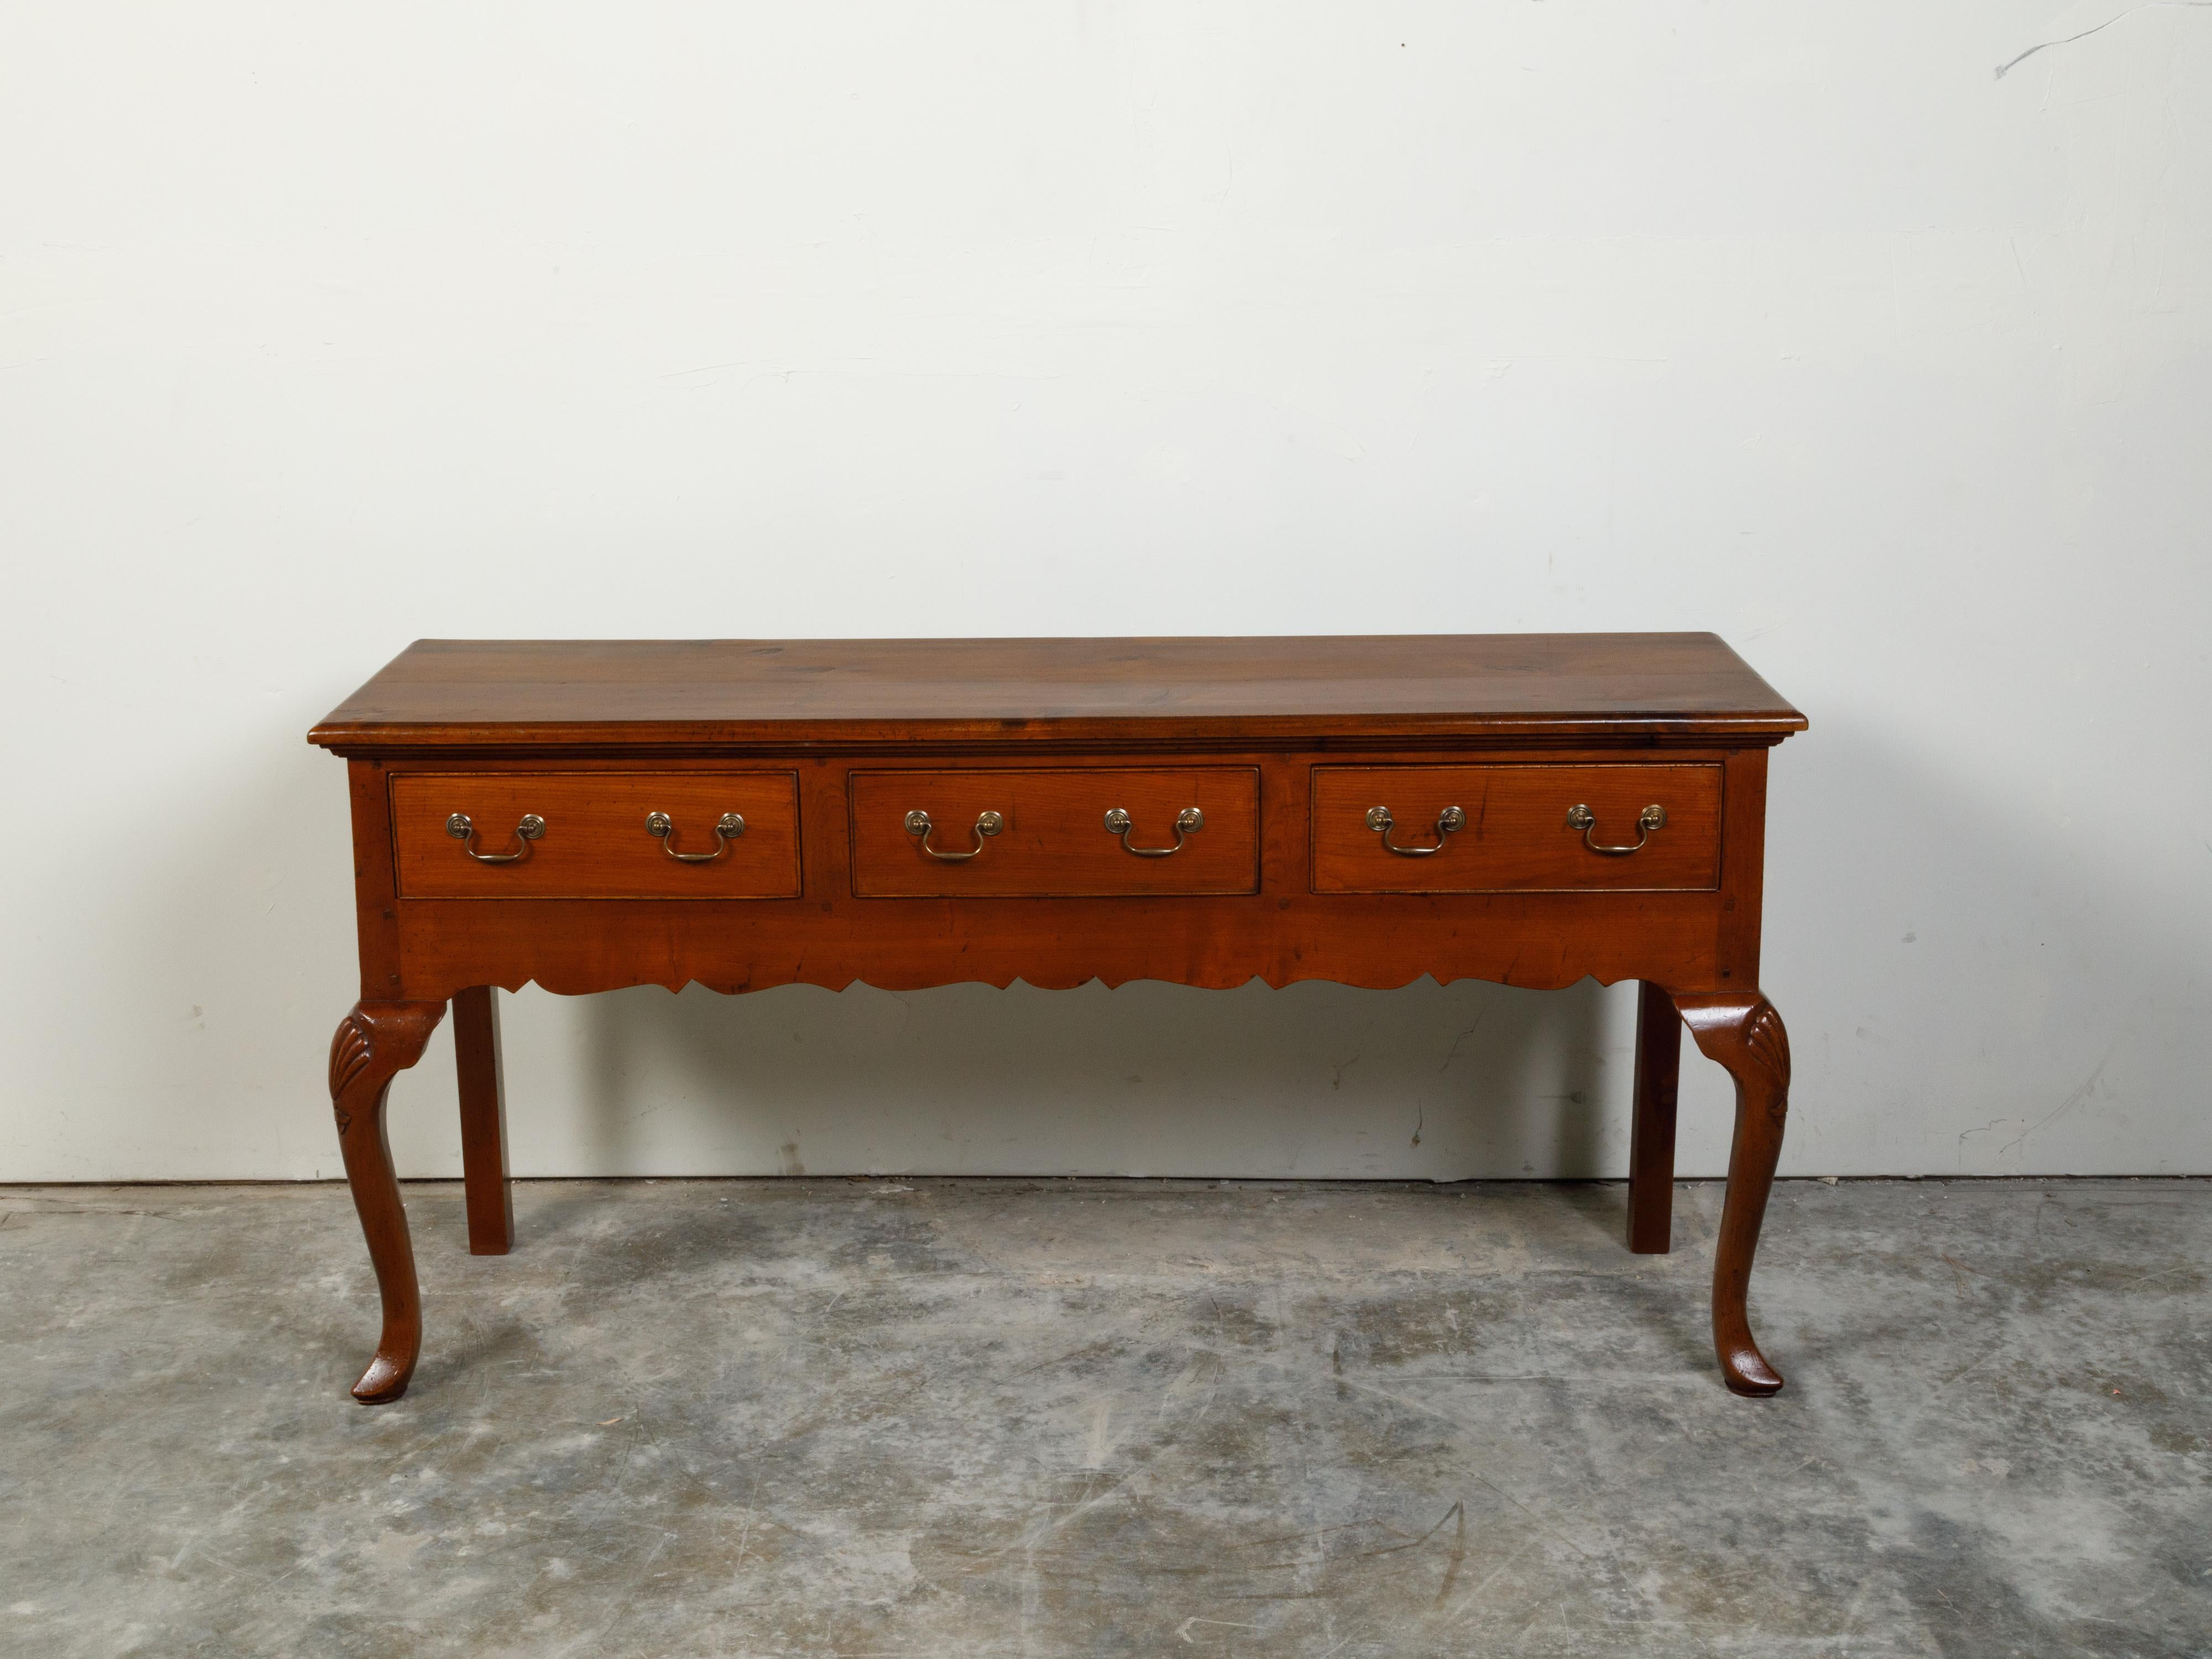 An English walnut or yew wood dresser base from the mid 20th century, with three drawers and carved apron. Created in England during the second quarter of the 20th century, this dresser base features a rectangular top sitting above three drawers